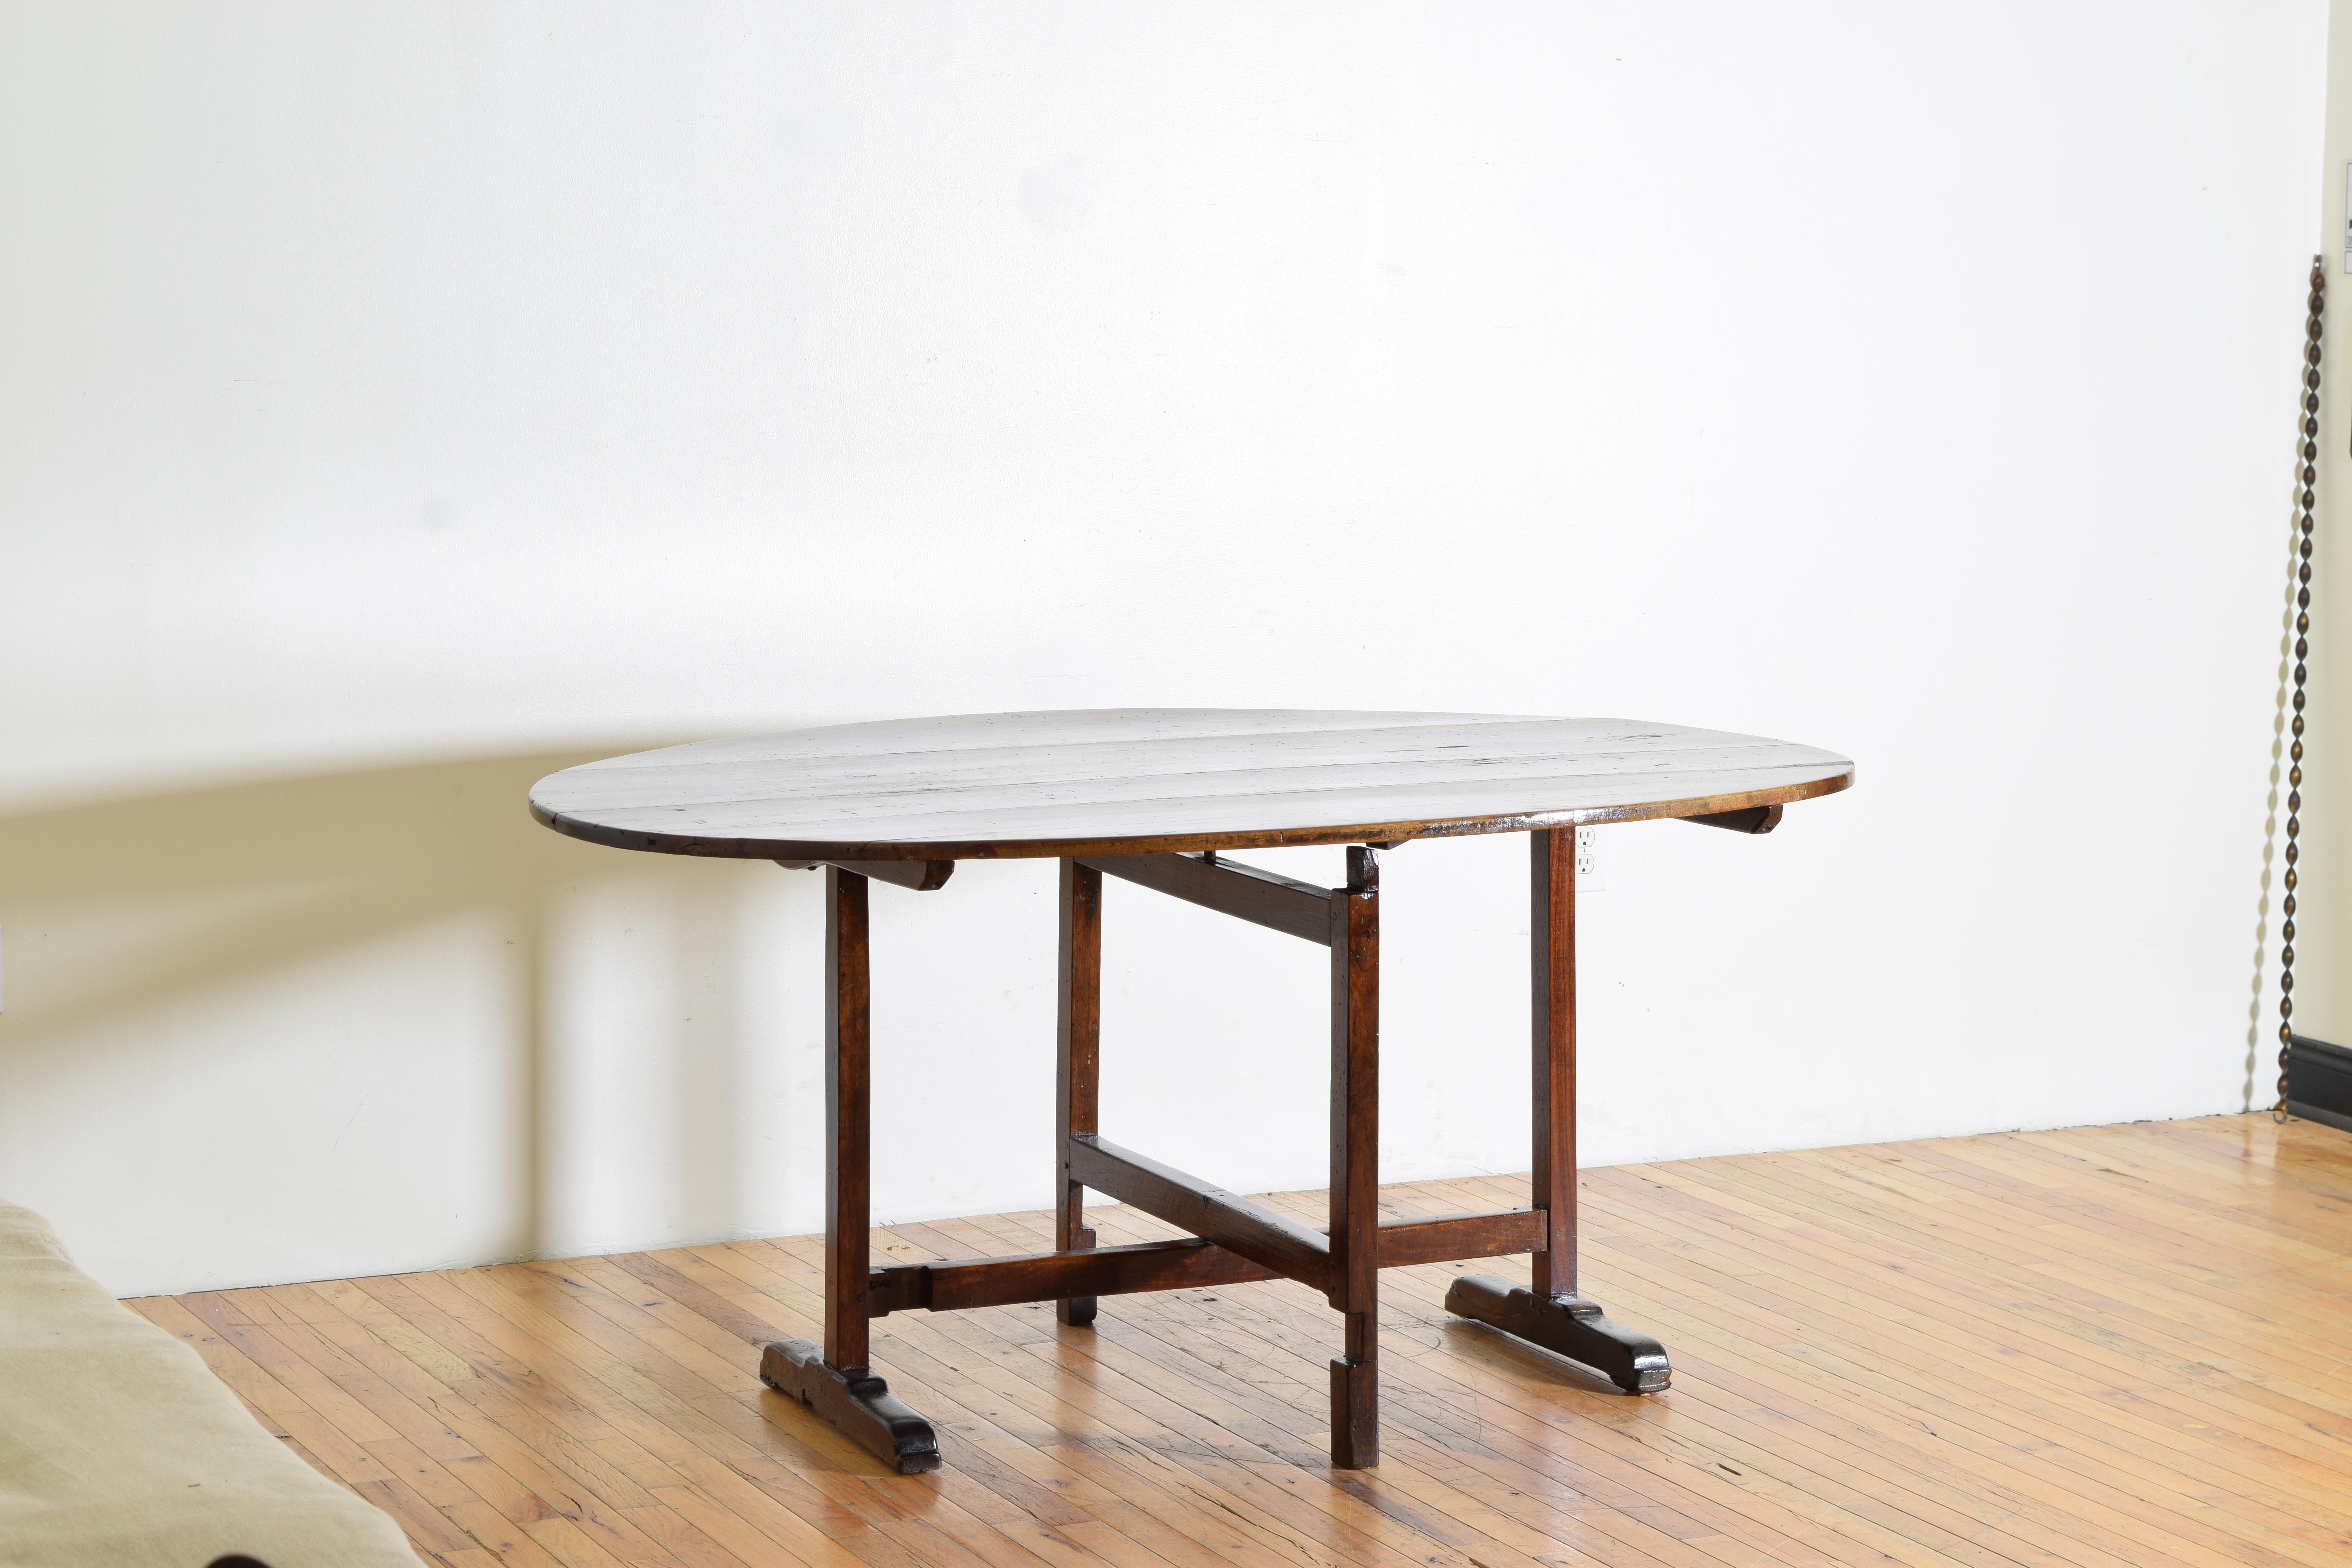 a portable table taken by wagon to the grape harvest in vineyards often used for meals and work this model is a large oval, the top of beautifully figured walnut boards, the swivel base locking at perpendicular to support the top, the square legs